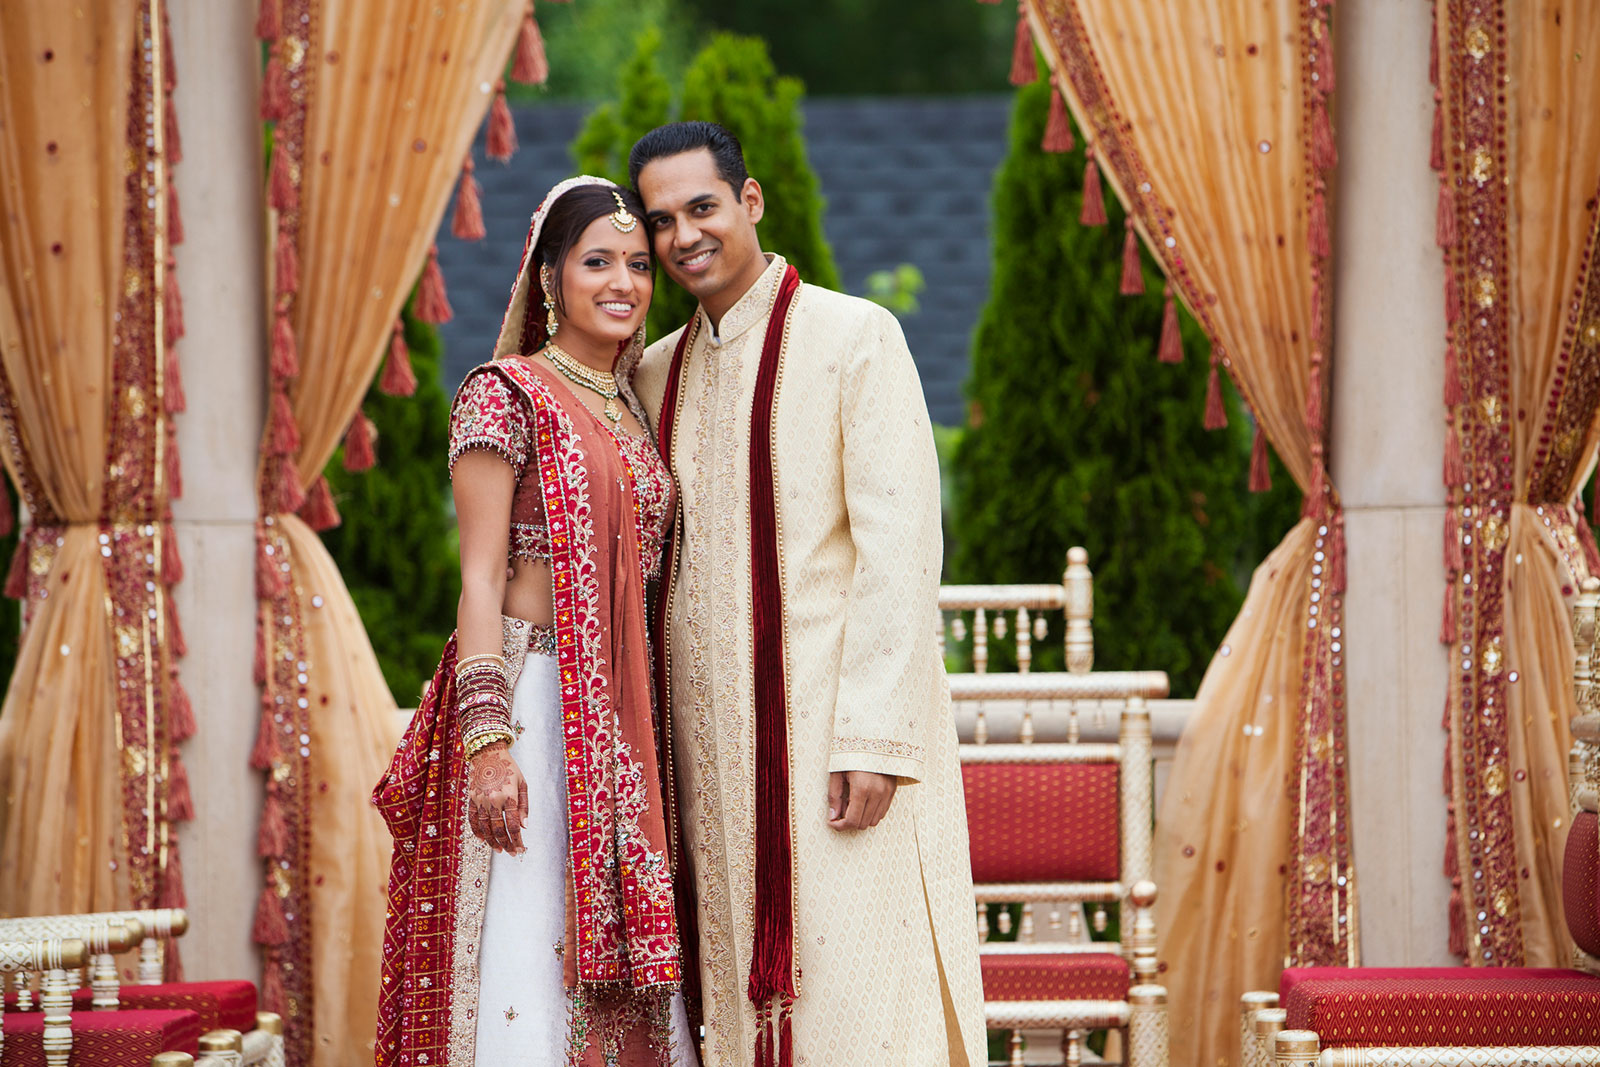 Indian Wedding Attire For Men - Indian Wedding Dresses For Men And Women , HD Wallpaper & Backgrounds